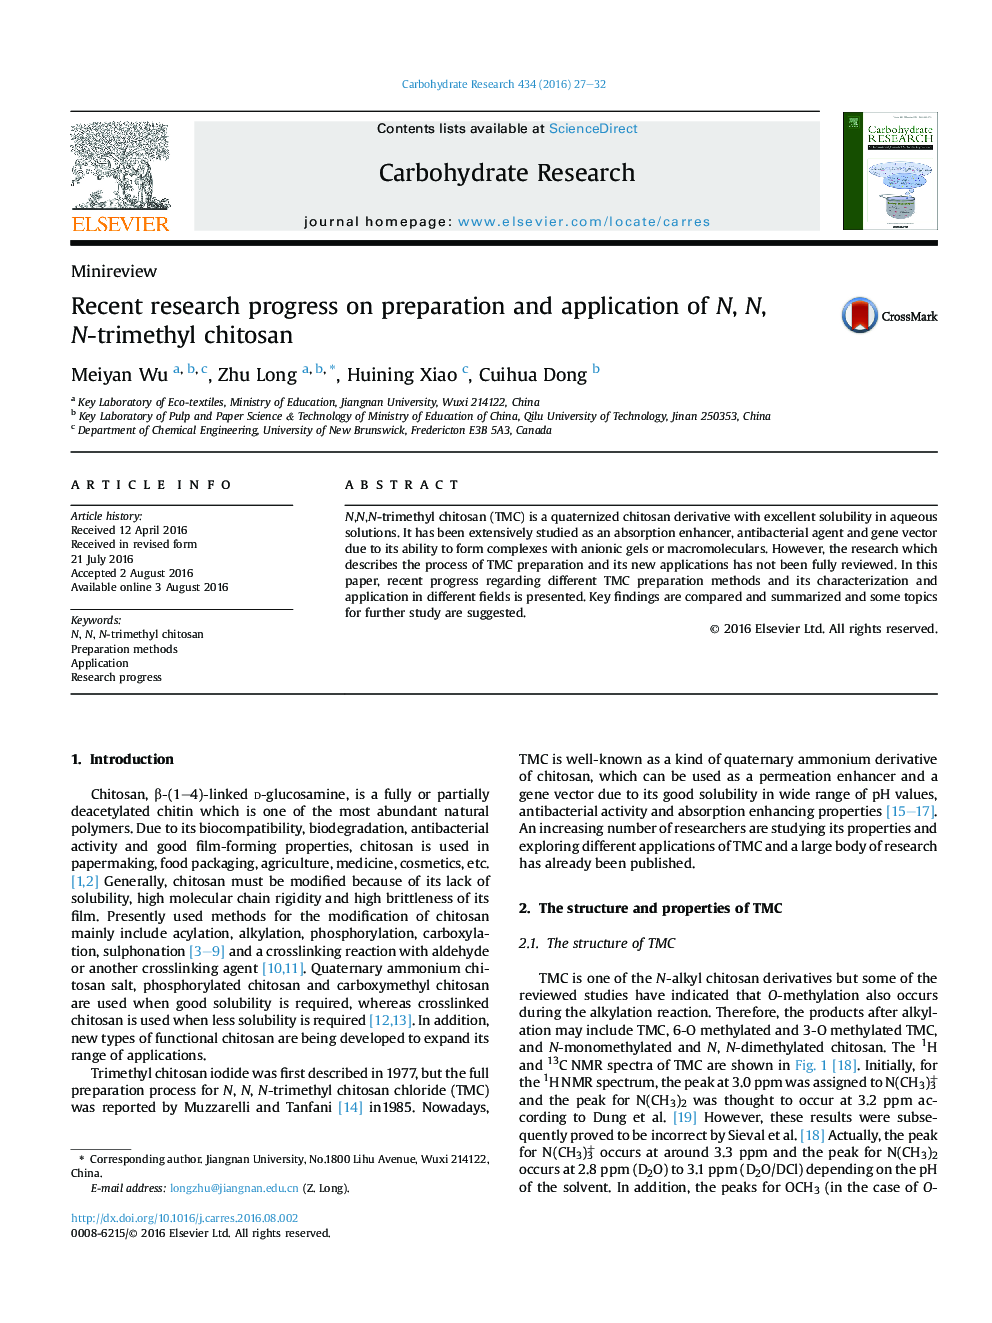 Recent research progress on preparation and application of N, N, N-trimethyl chitosan